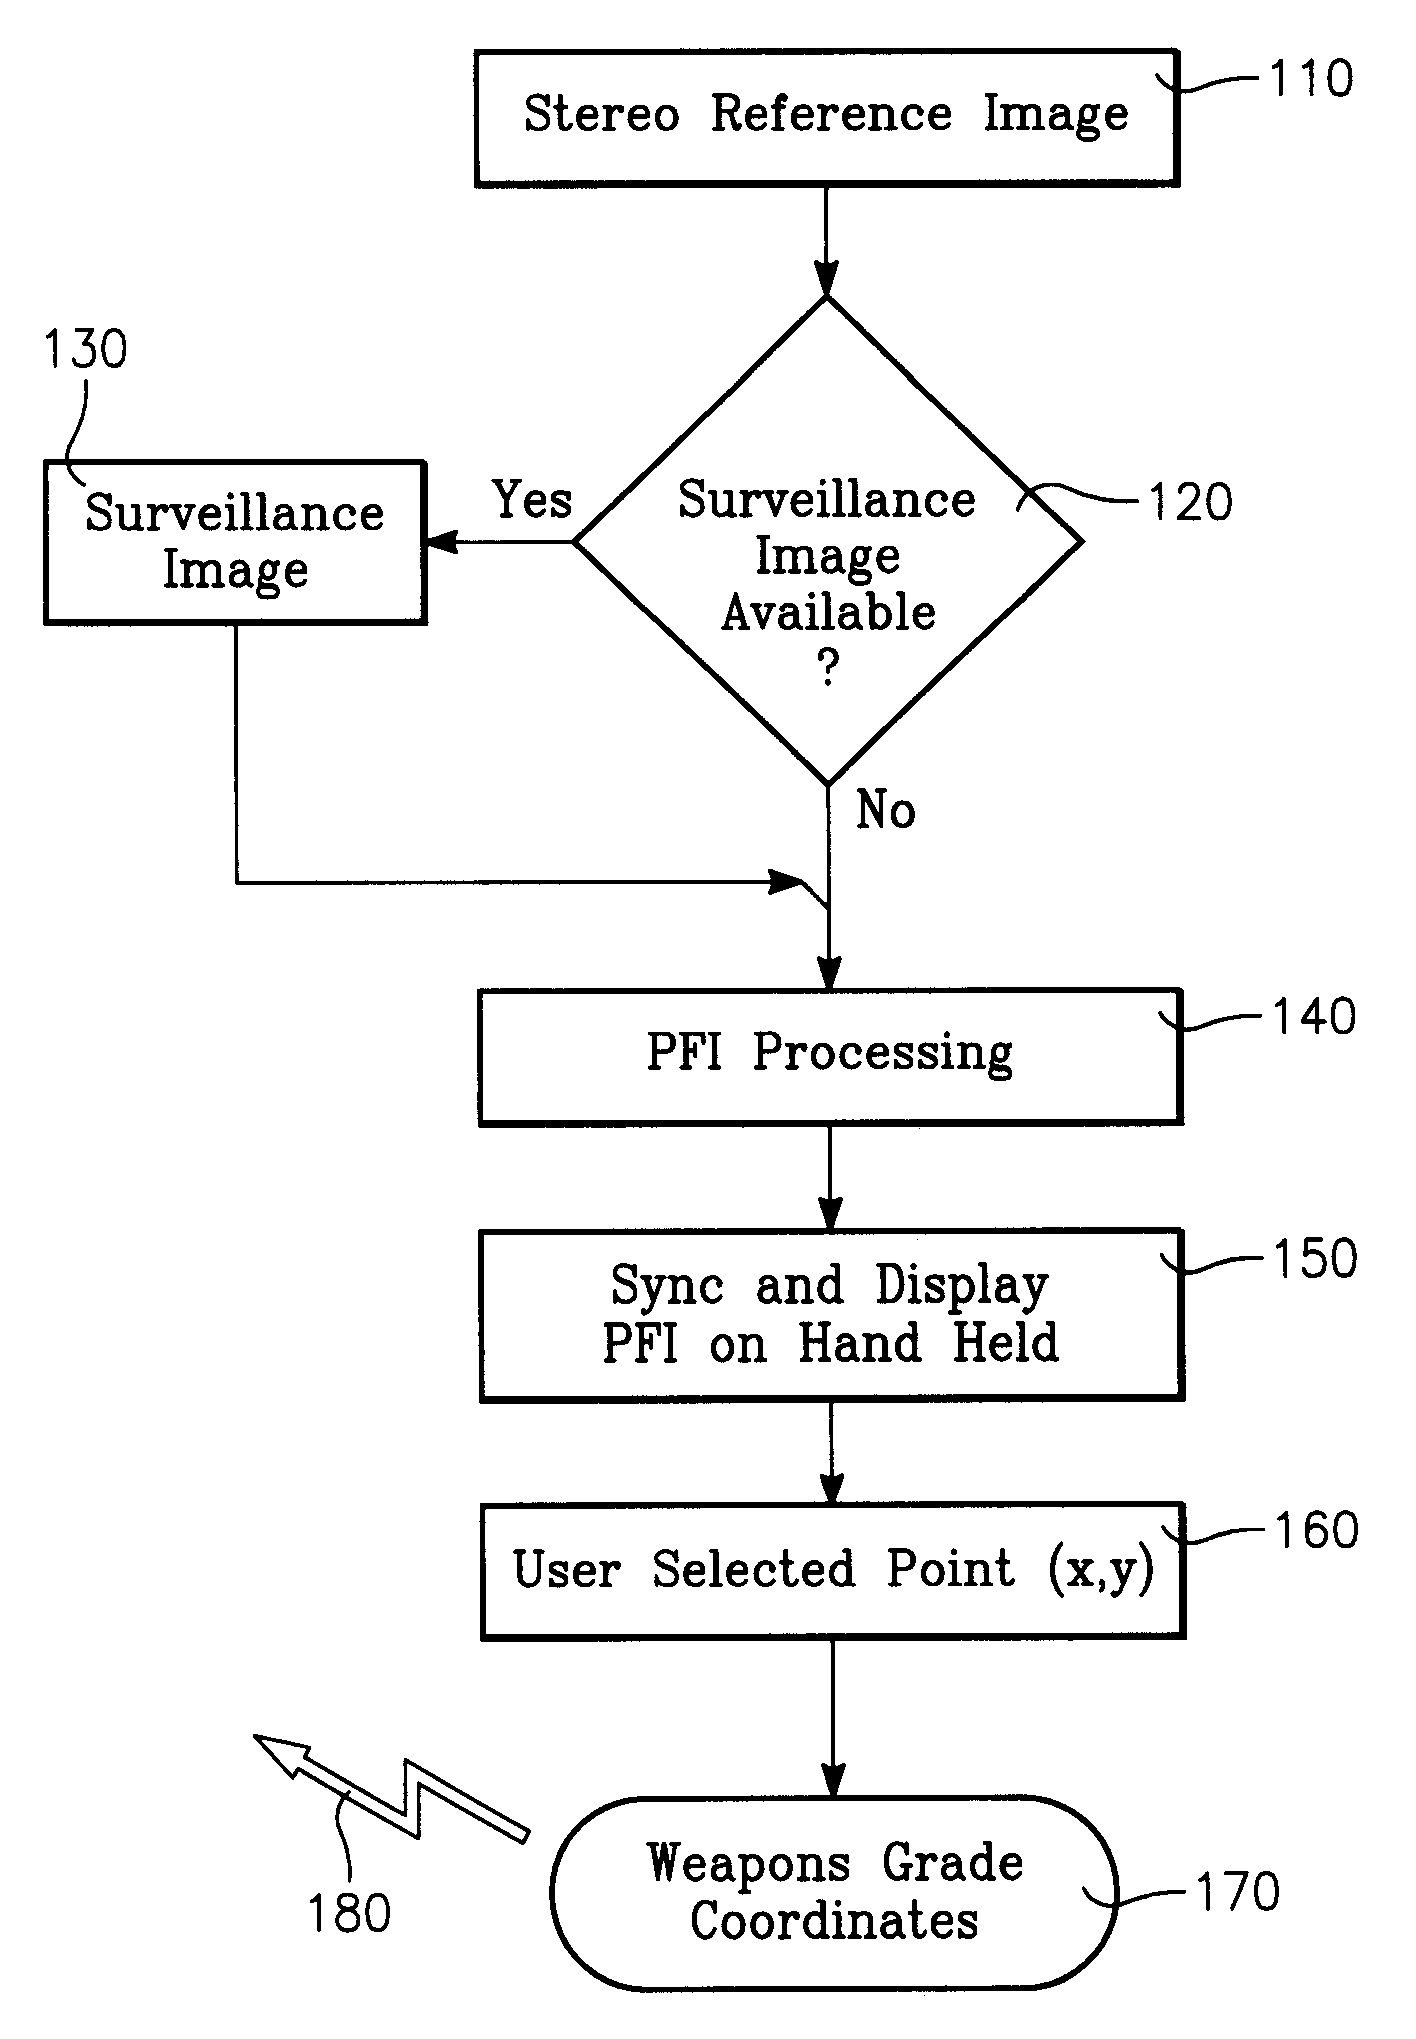 Method and Apparatus for Generating a Precision Fires Image Using a Handheld Device for Image Based Coordinate Determination